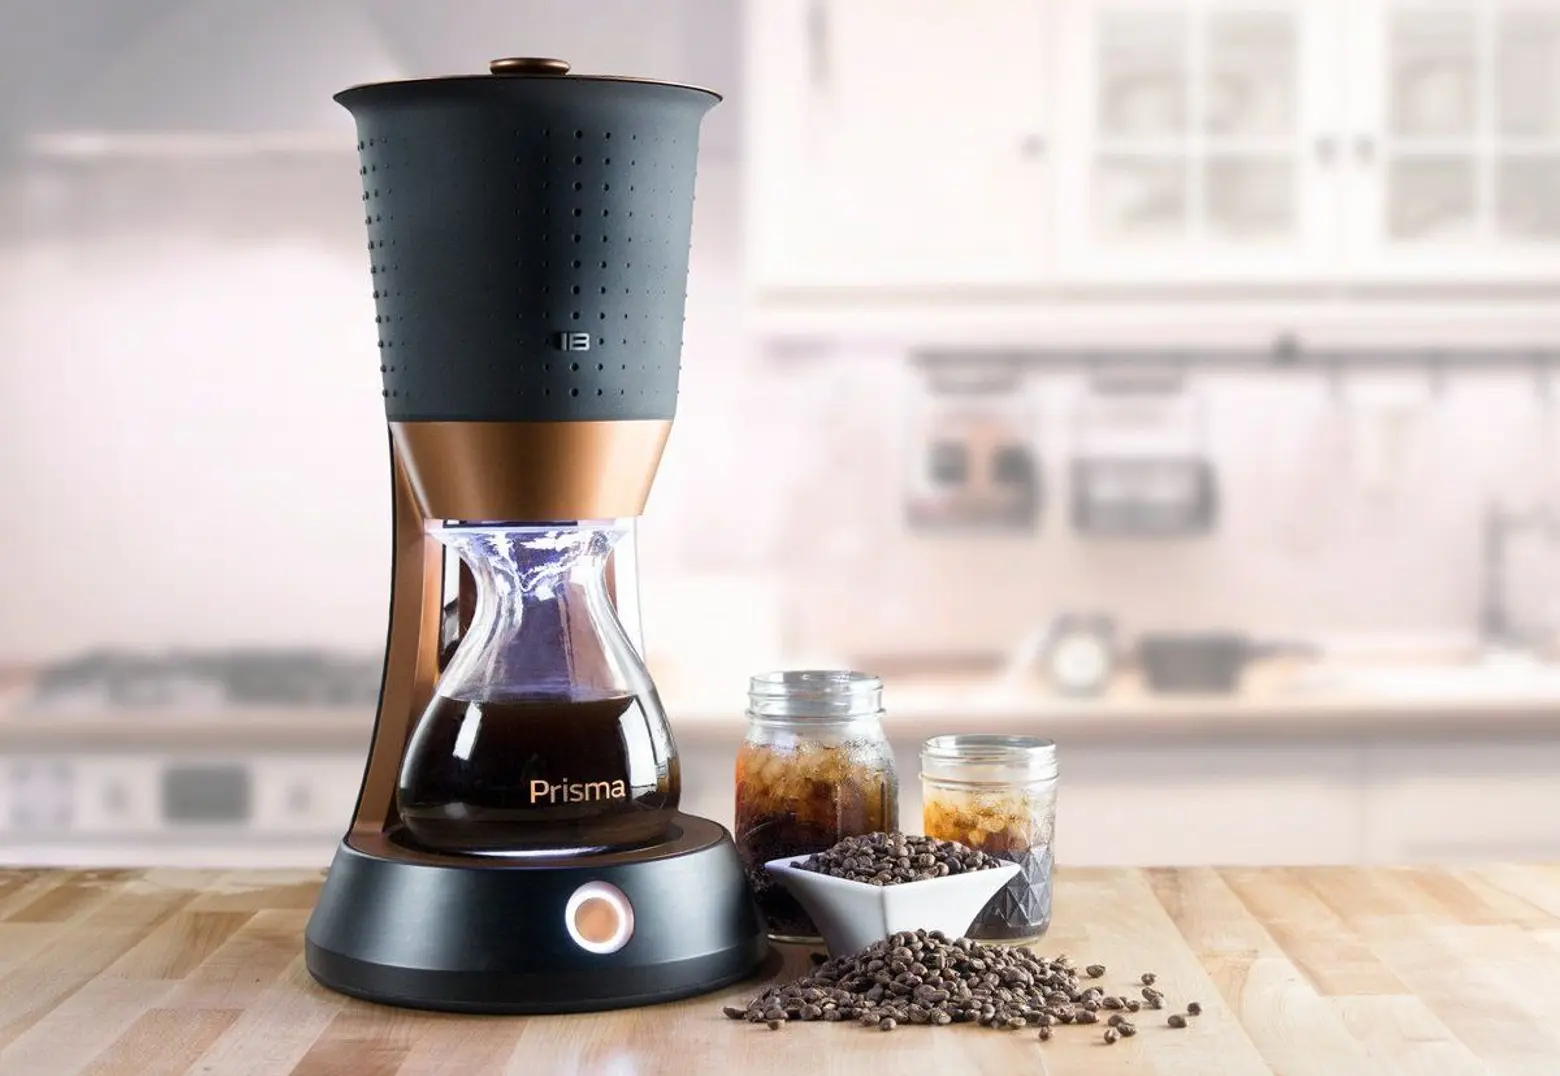 Prisma Coffeemaker Makes Cold Brew in Just 10 Minutes